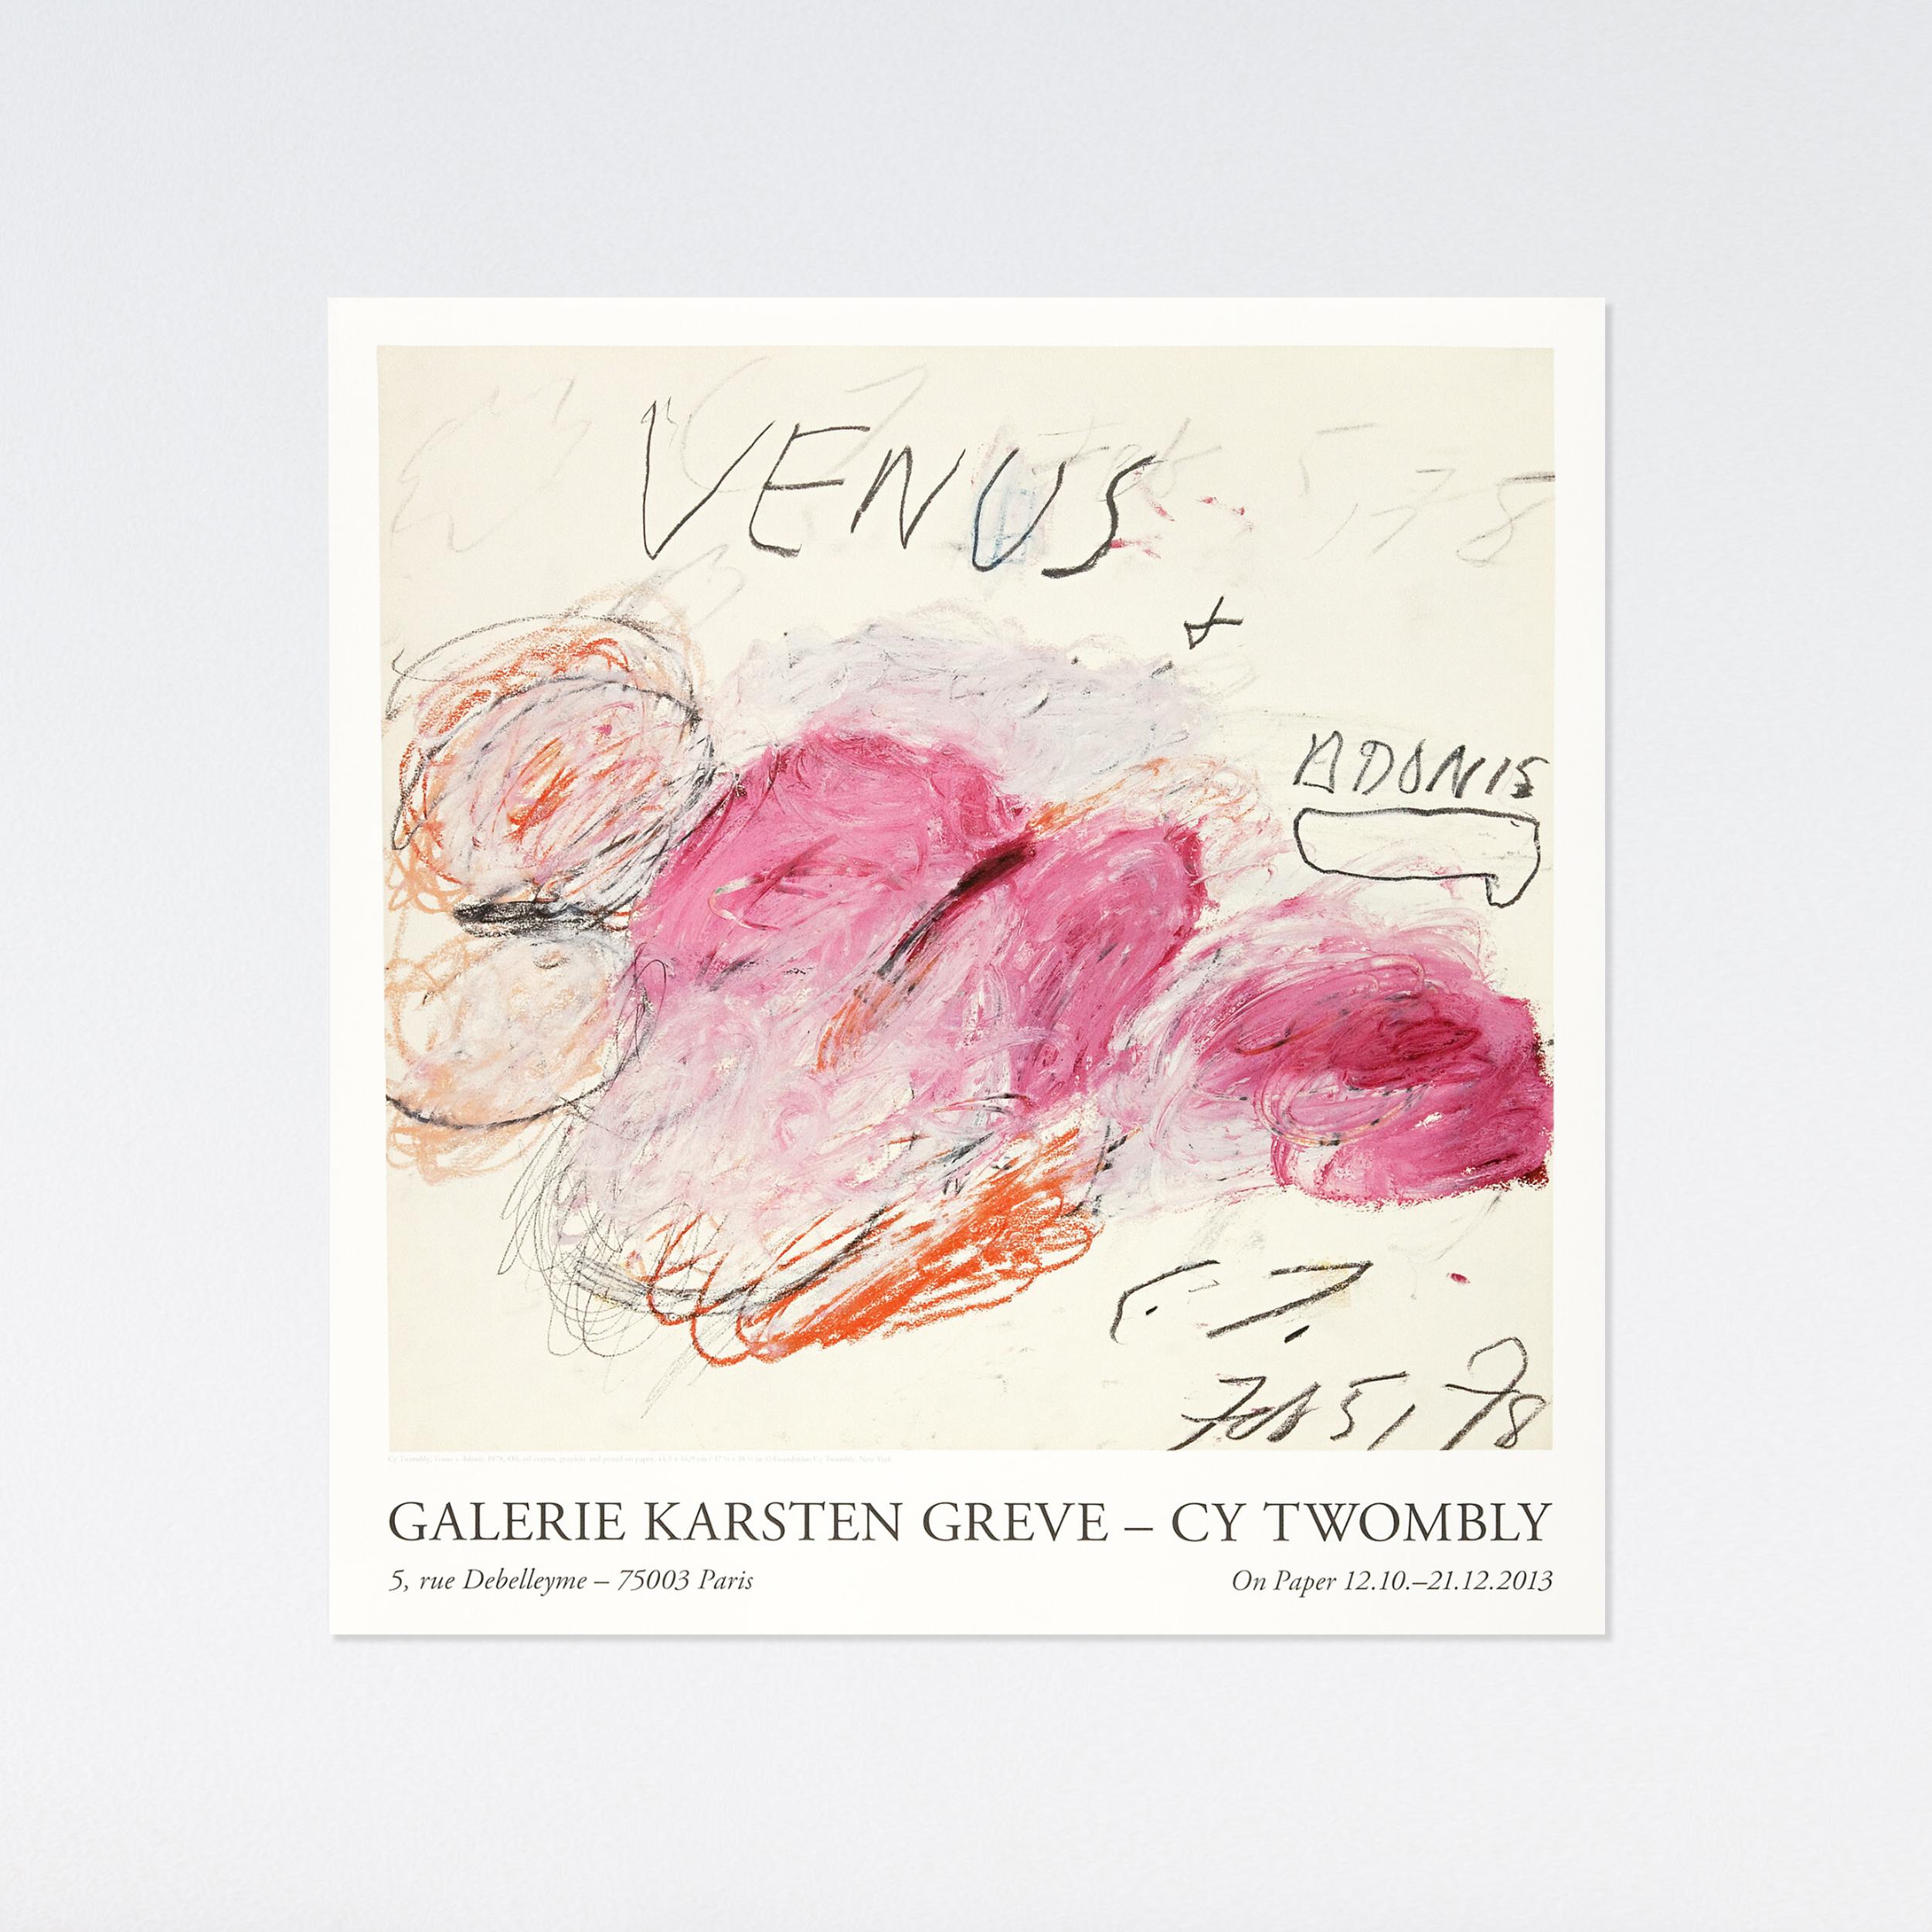 Cy Twombly, Venus + Adonis - On Paper,  2013 Exhibition Poster - Print by (after) Cy Twombly